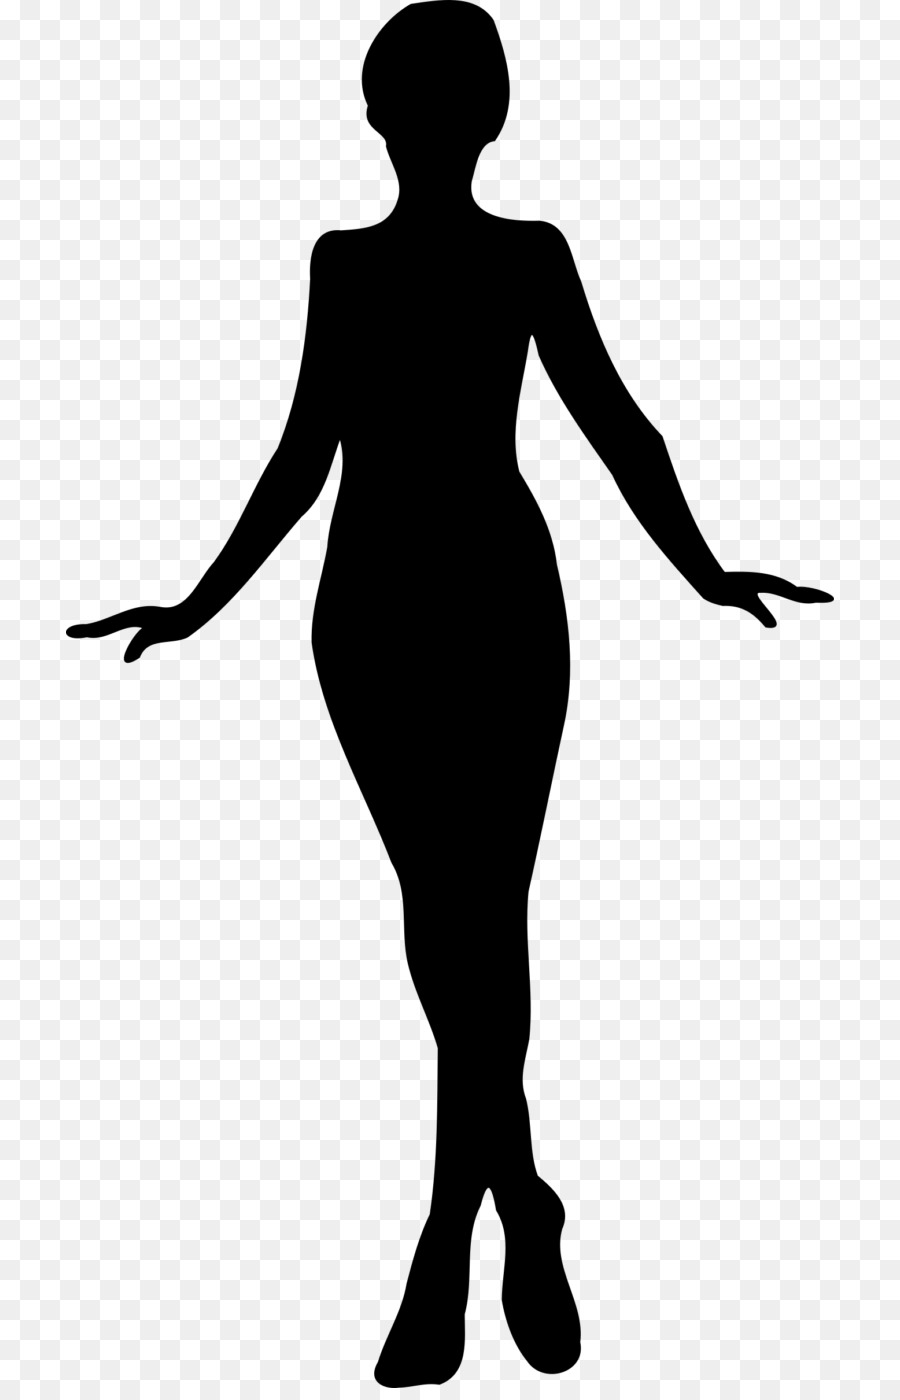 Clip art - Silhouette png download - 768*1388 - Free Transparent Woman png Download.